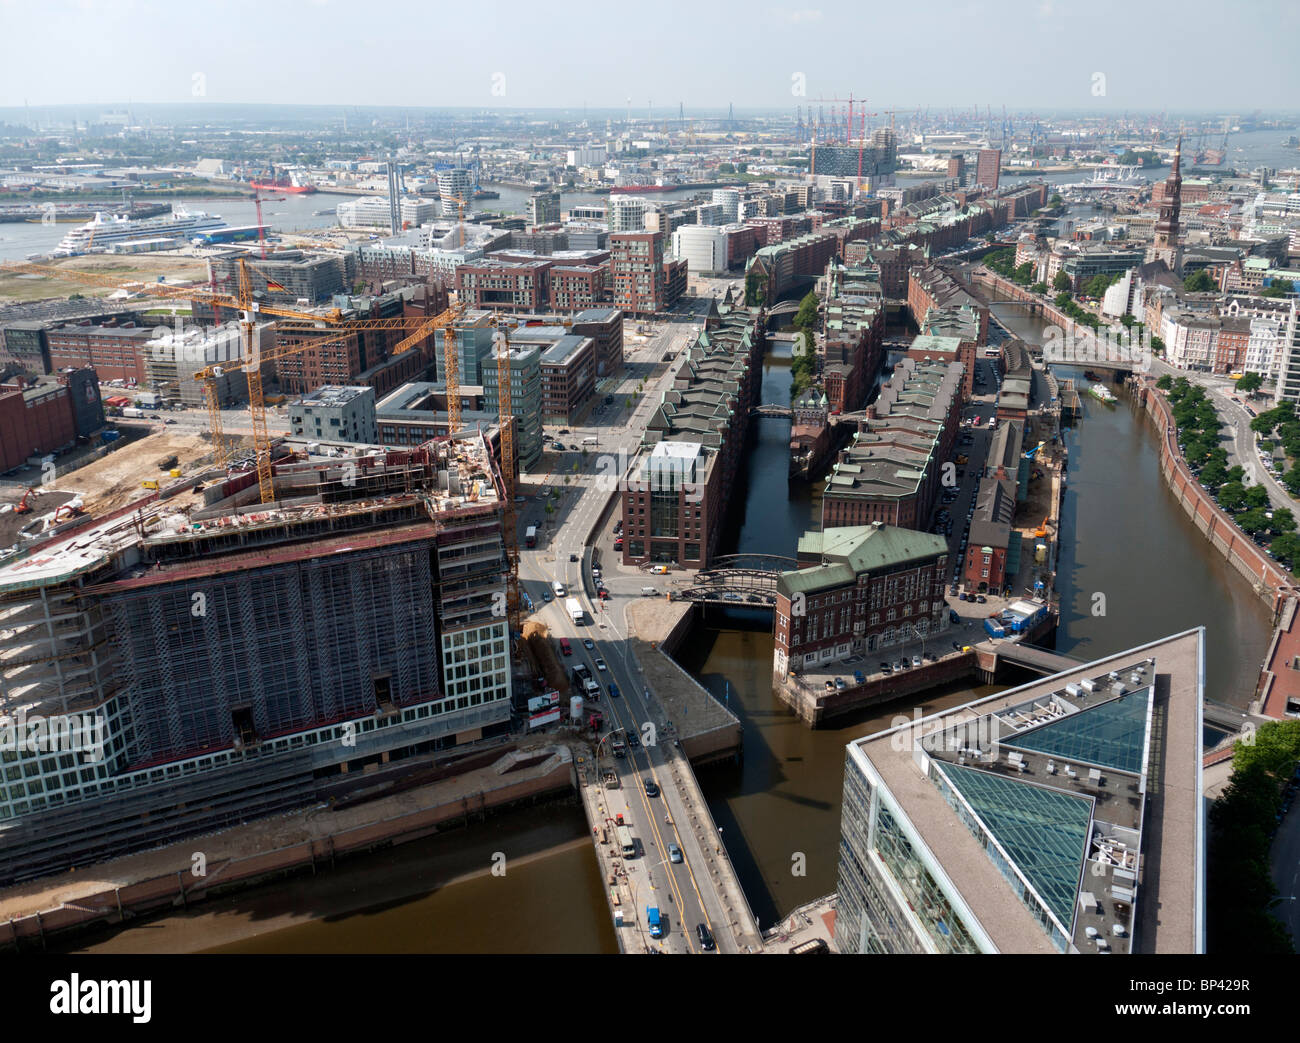 Cityscape of Hafencity new urban redevelopment with historic Speicherstadt in middle in Hamburg Germany Stock Photo